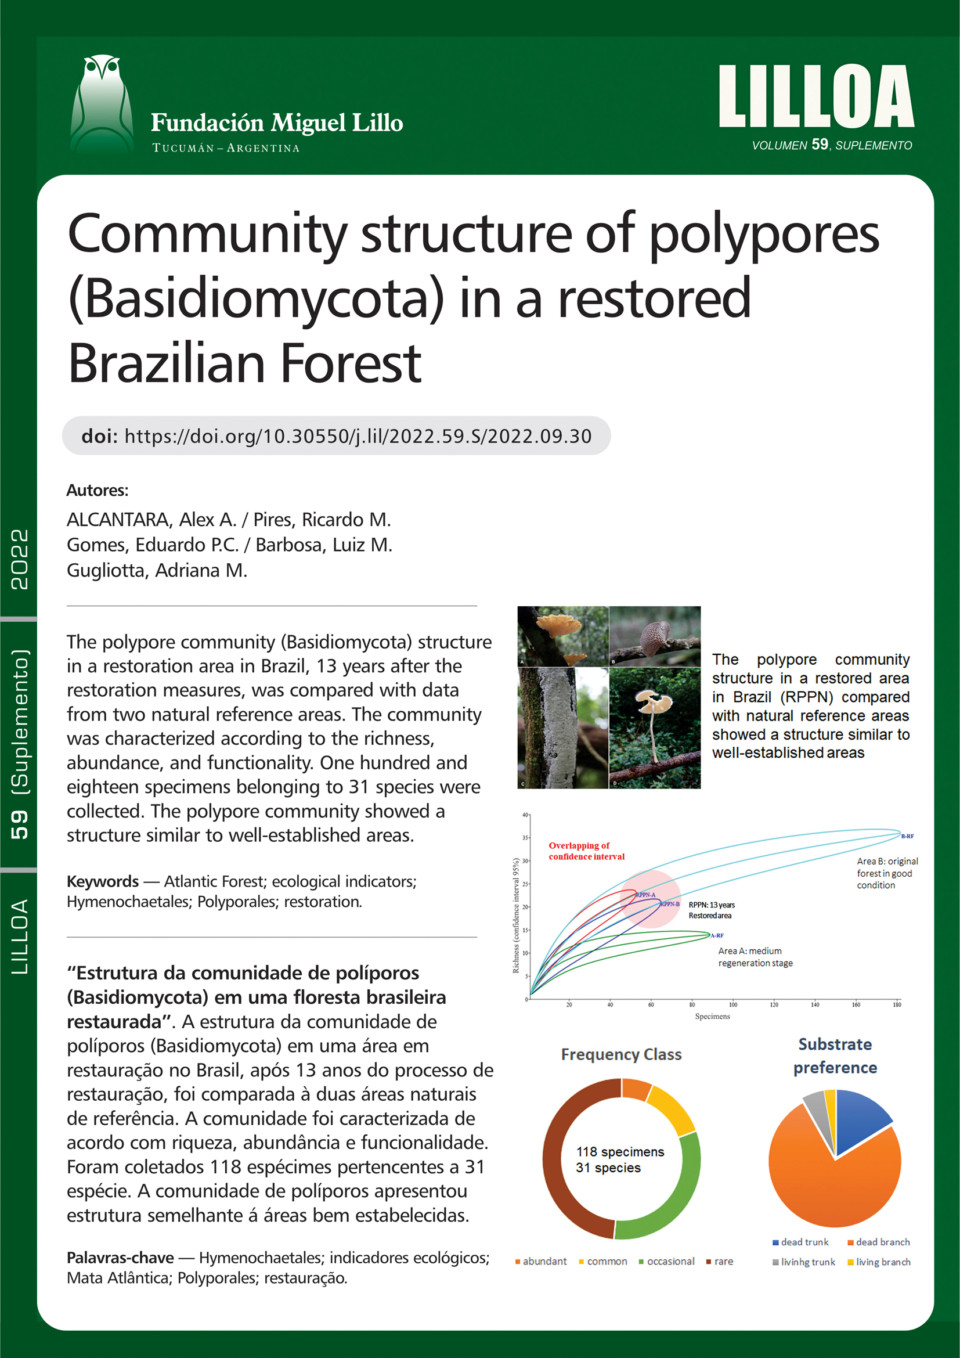 Community structure of polypores (Basidiomycota) in a restored Brazilian Forest